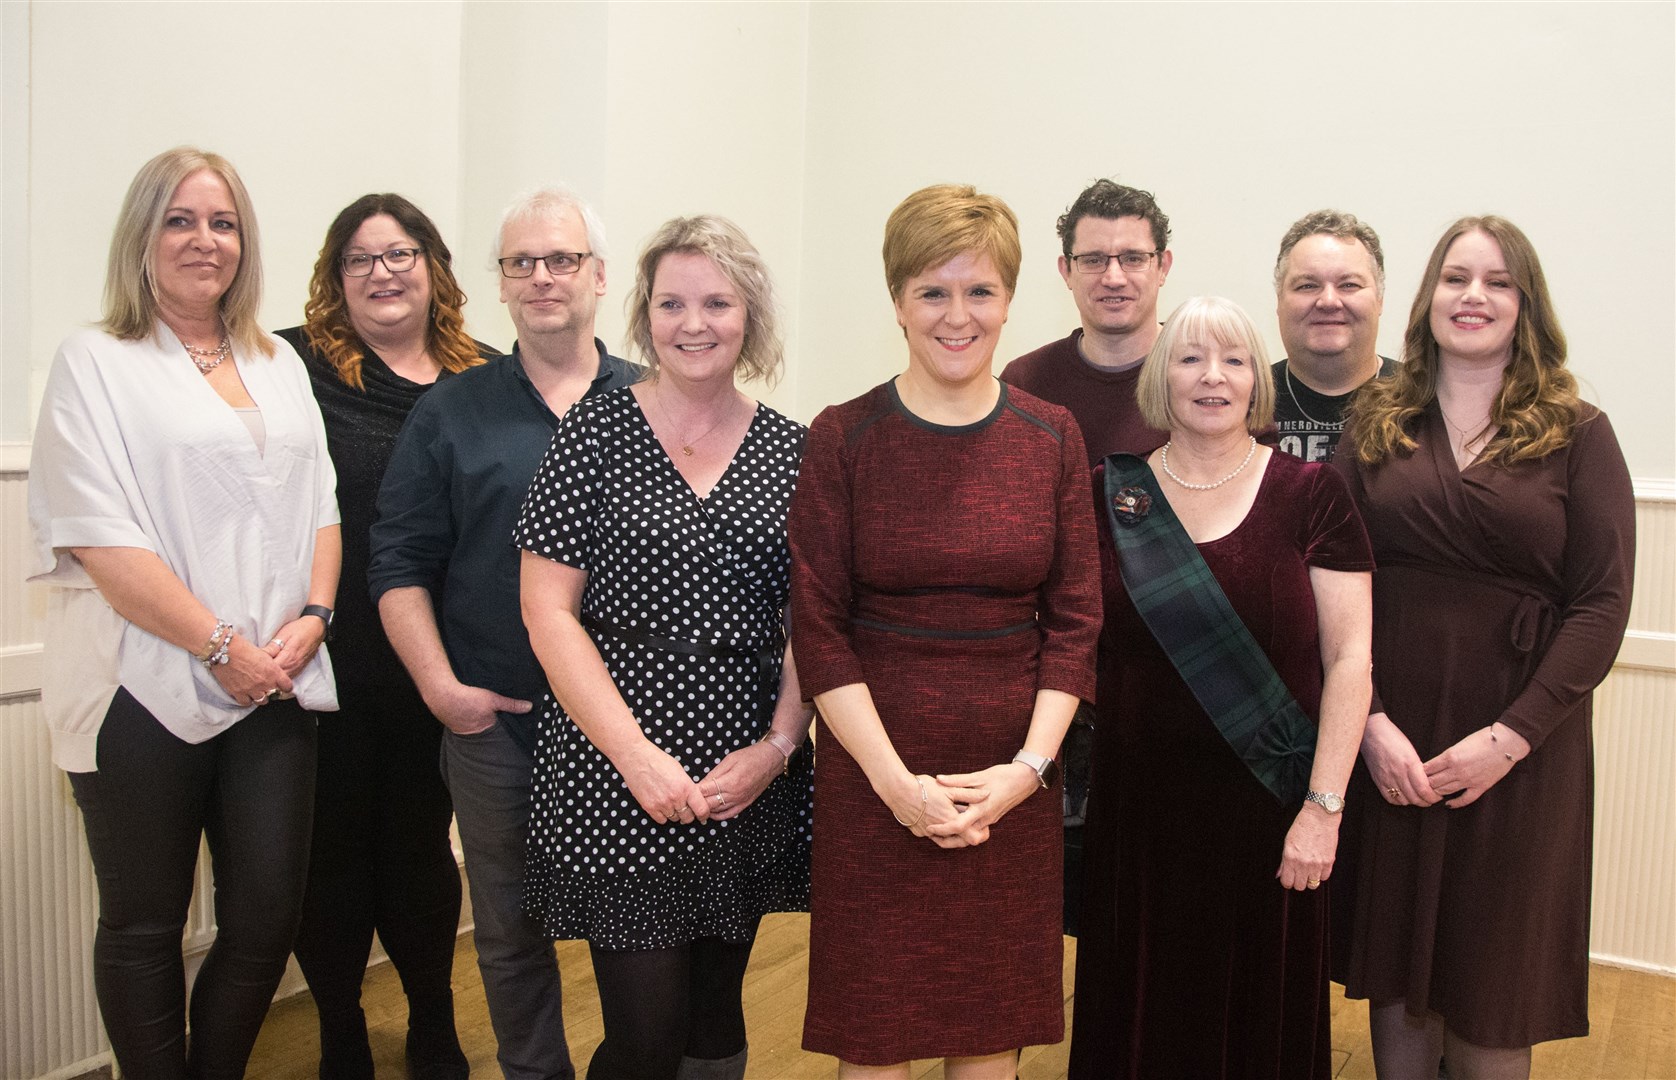 Moray SNP councillors with First Minister Nicola Sturgeon at Moray SNP's Burns Supper, at the Longmore Hall, Keith. From left, Paula Coy, Shona Morrison, David Bremner, Louise Laing, Aaron McLean, Theresa Coull, Graham Leadbitter and Amy Taylor. Picture: Becky Saunderson.